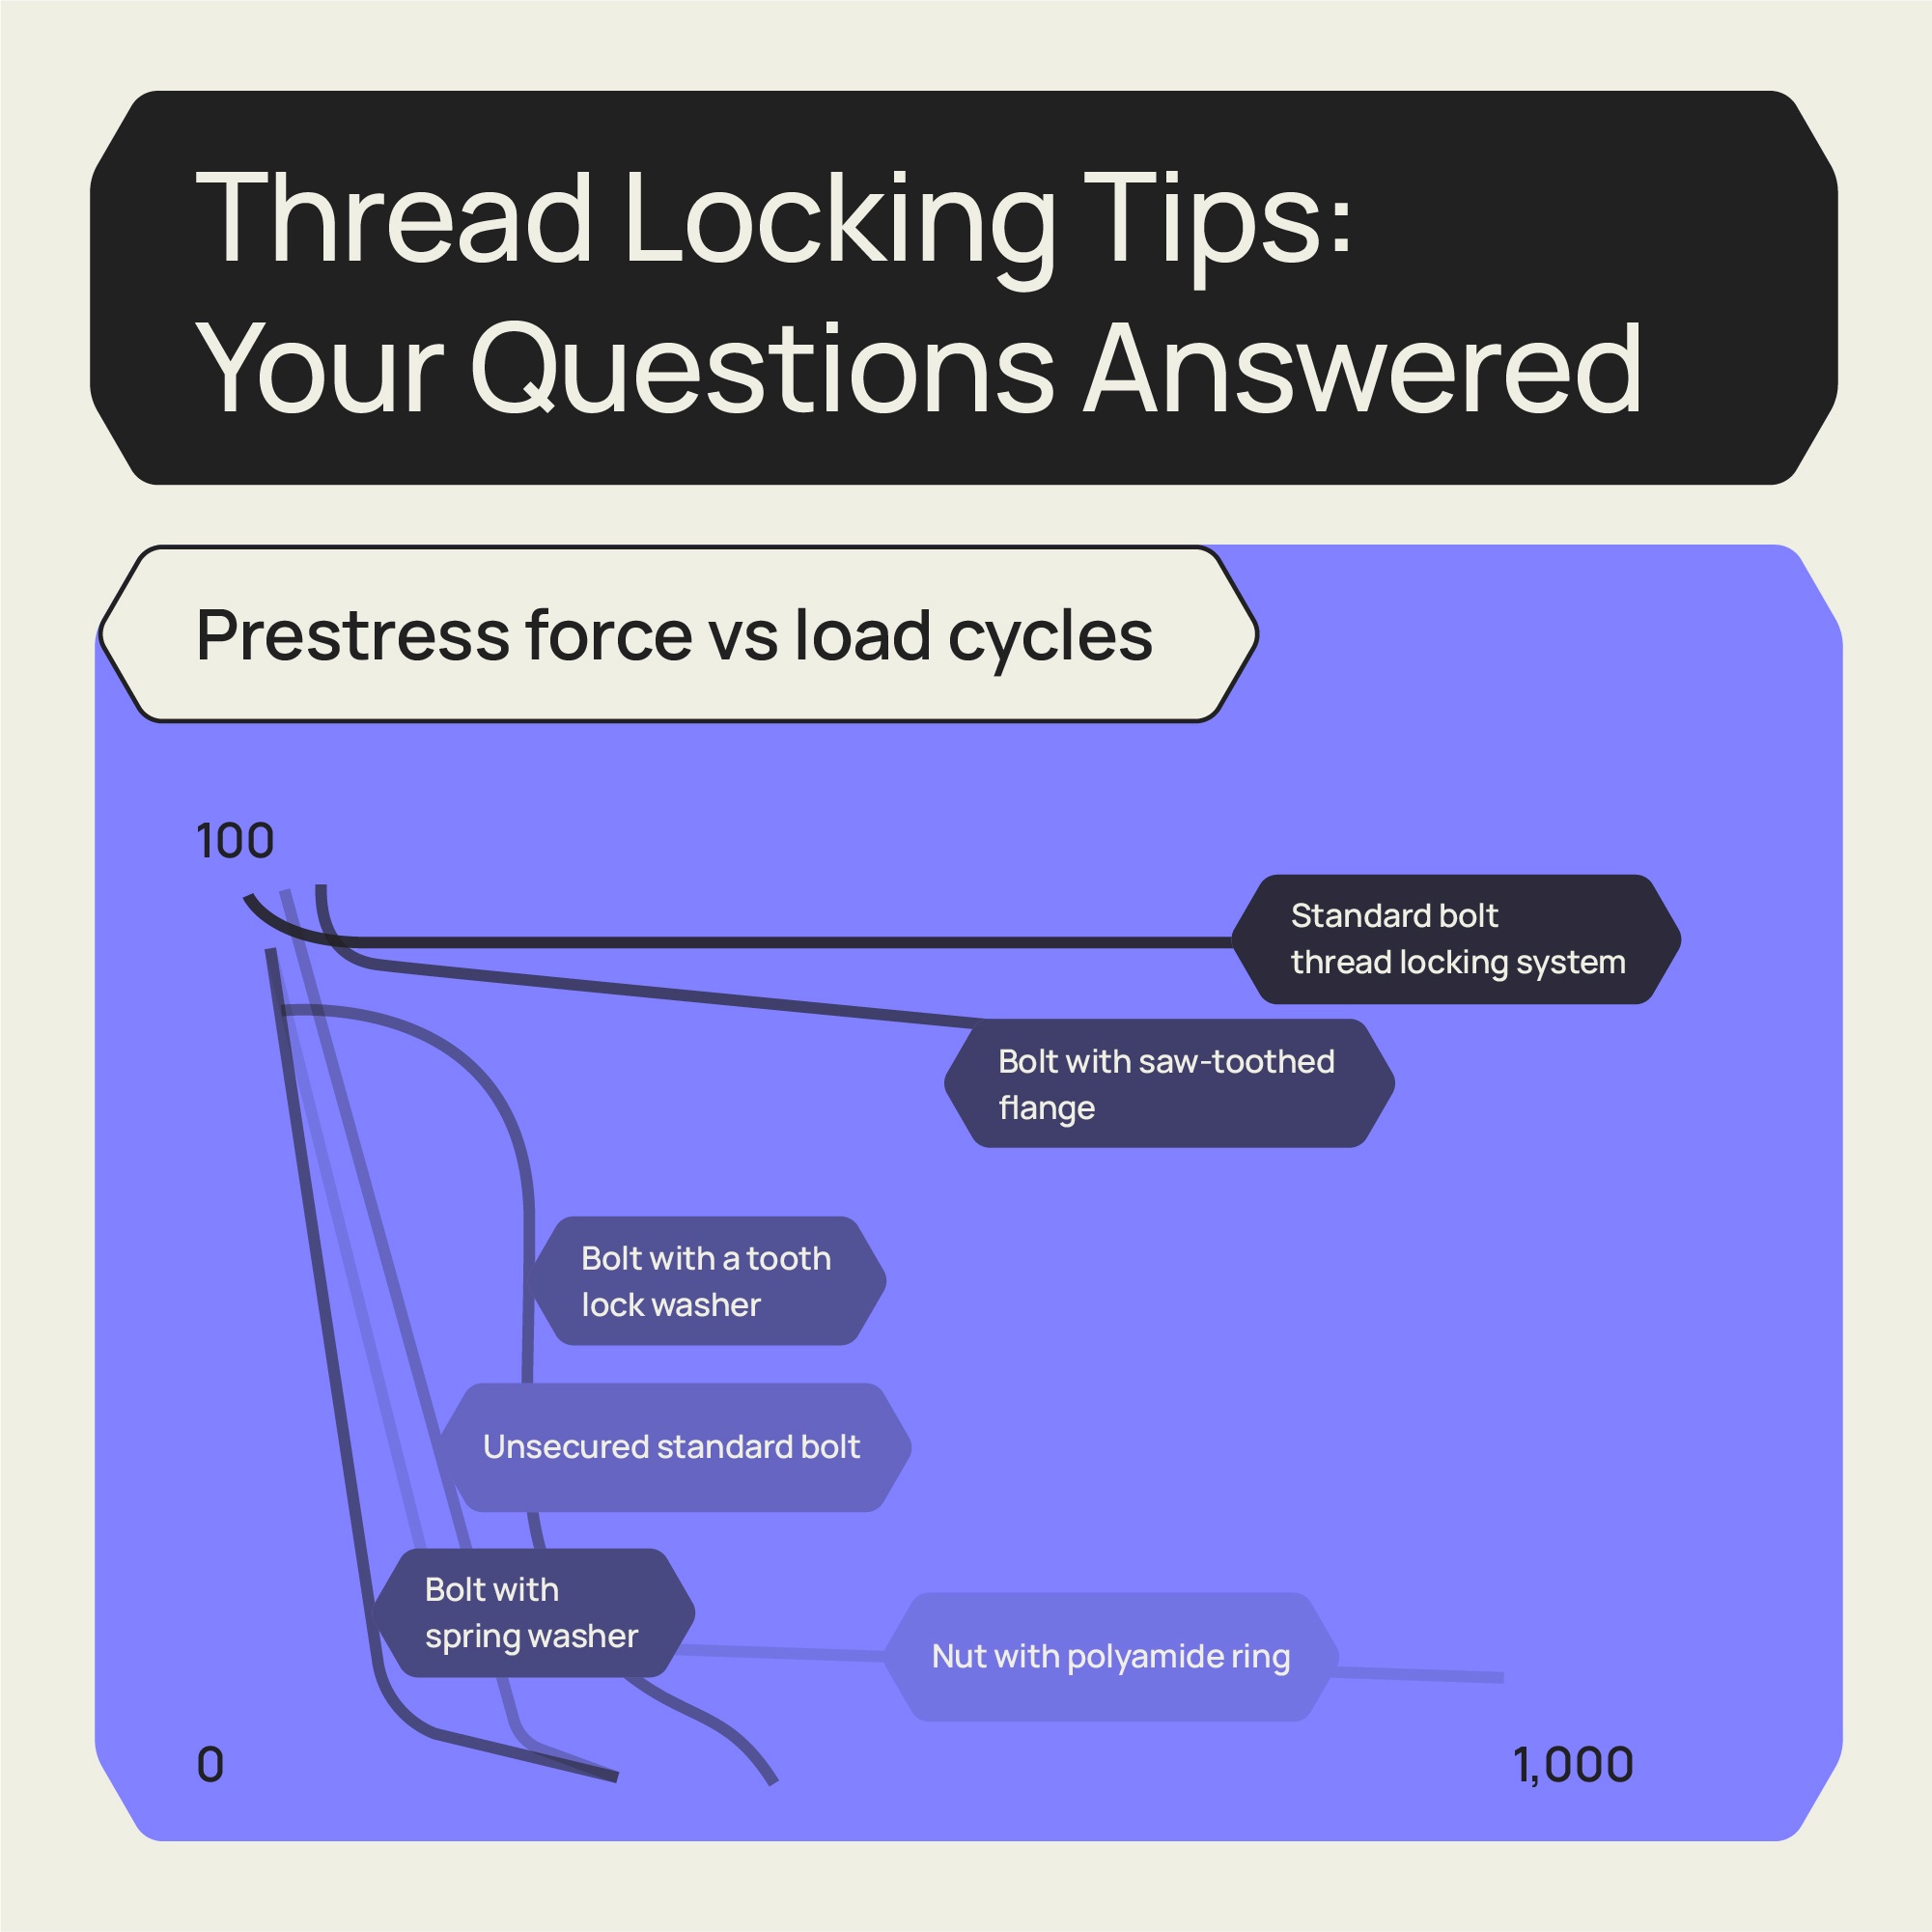 Thread locking tips: your questions answered